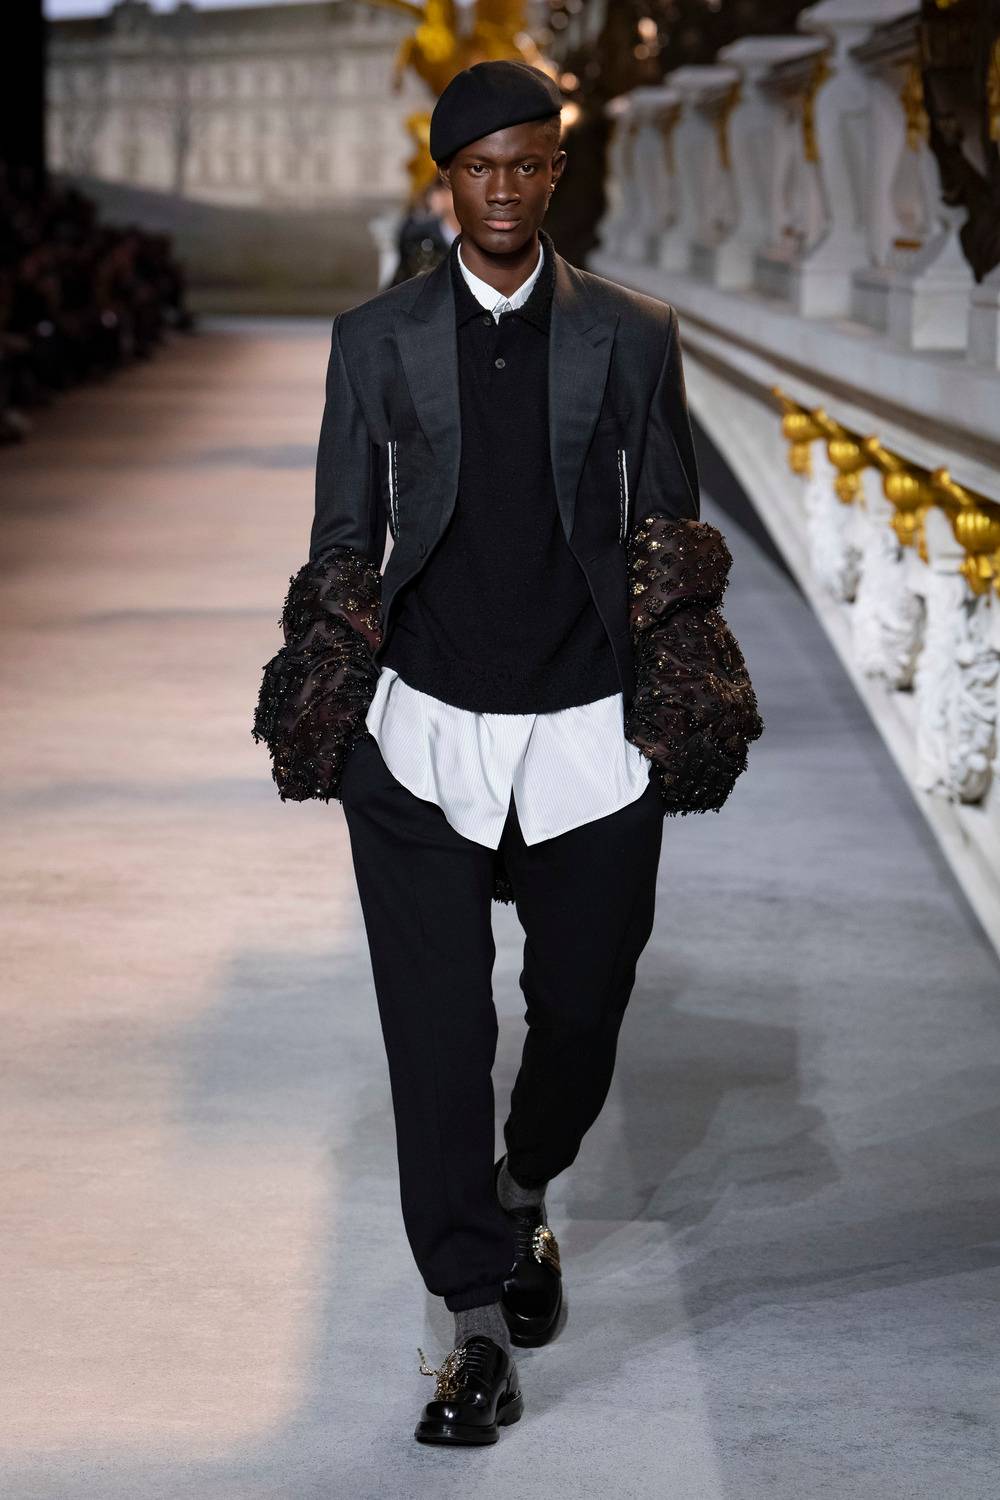 Kim Jones revisits Christian Dior’s essentials for his Fall/Winter 2022-2023 men’s collection